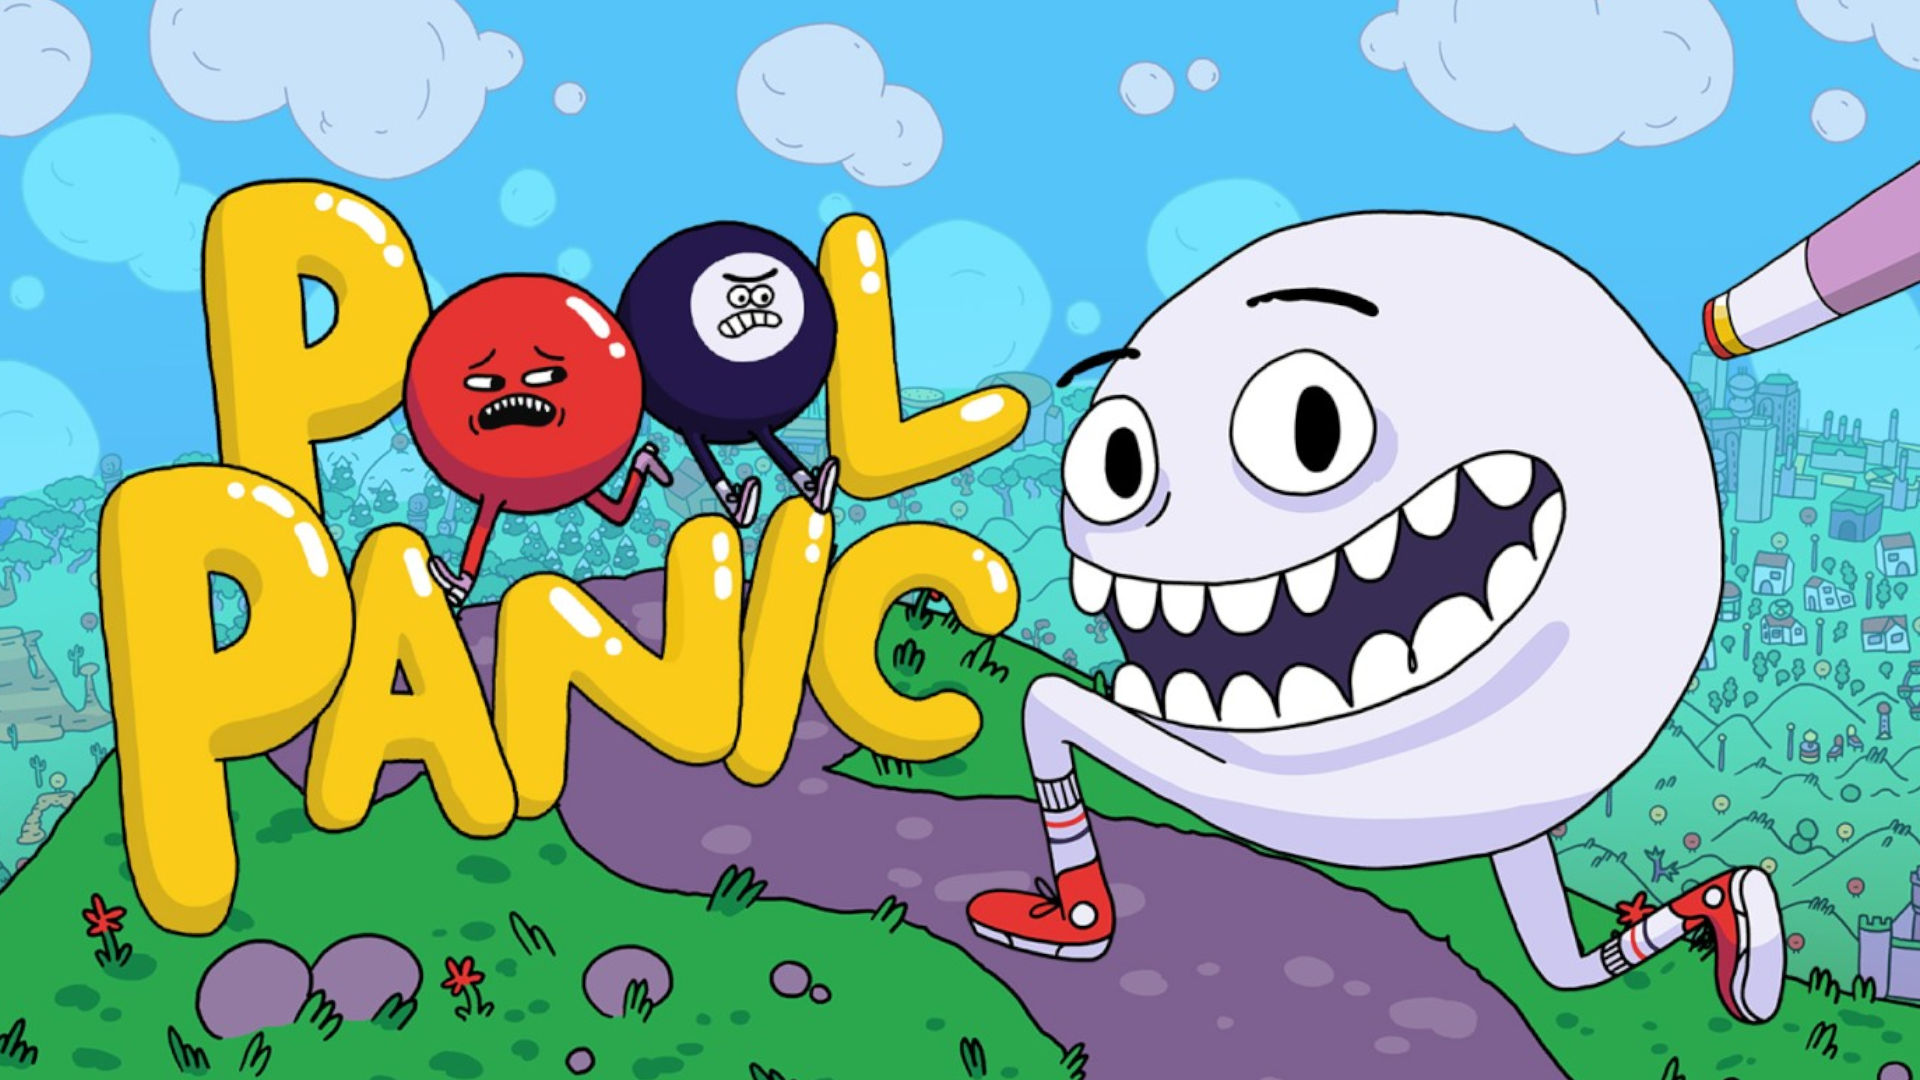 Pool Panic cover art, one of the wackier pool games on Switch